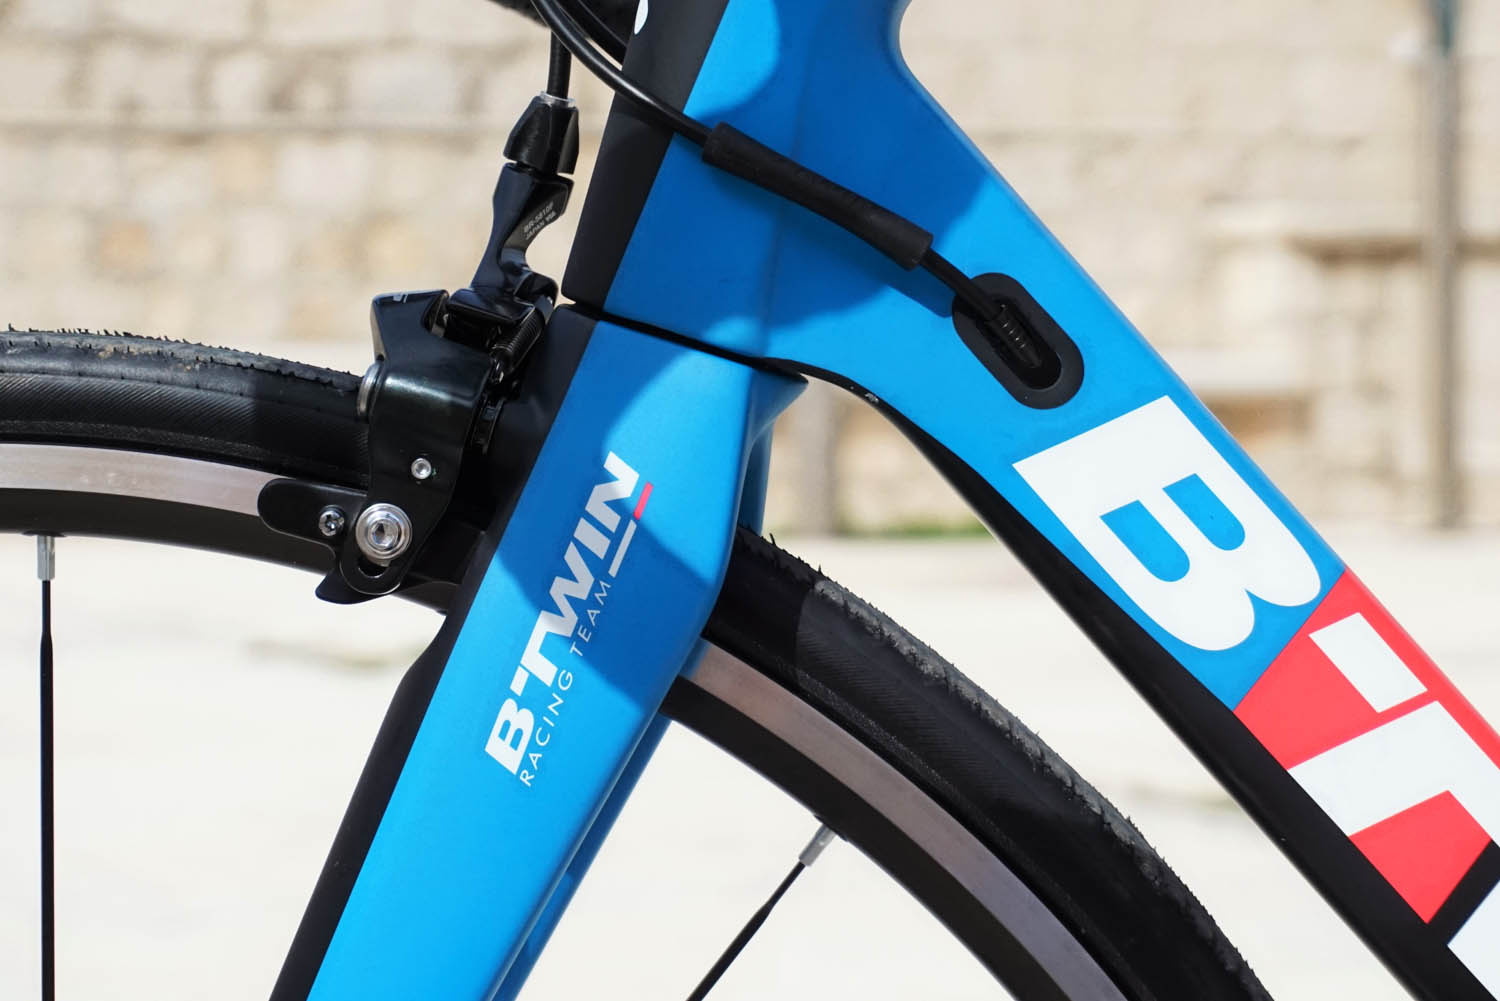 btwin ultra 900 cf review